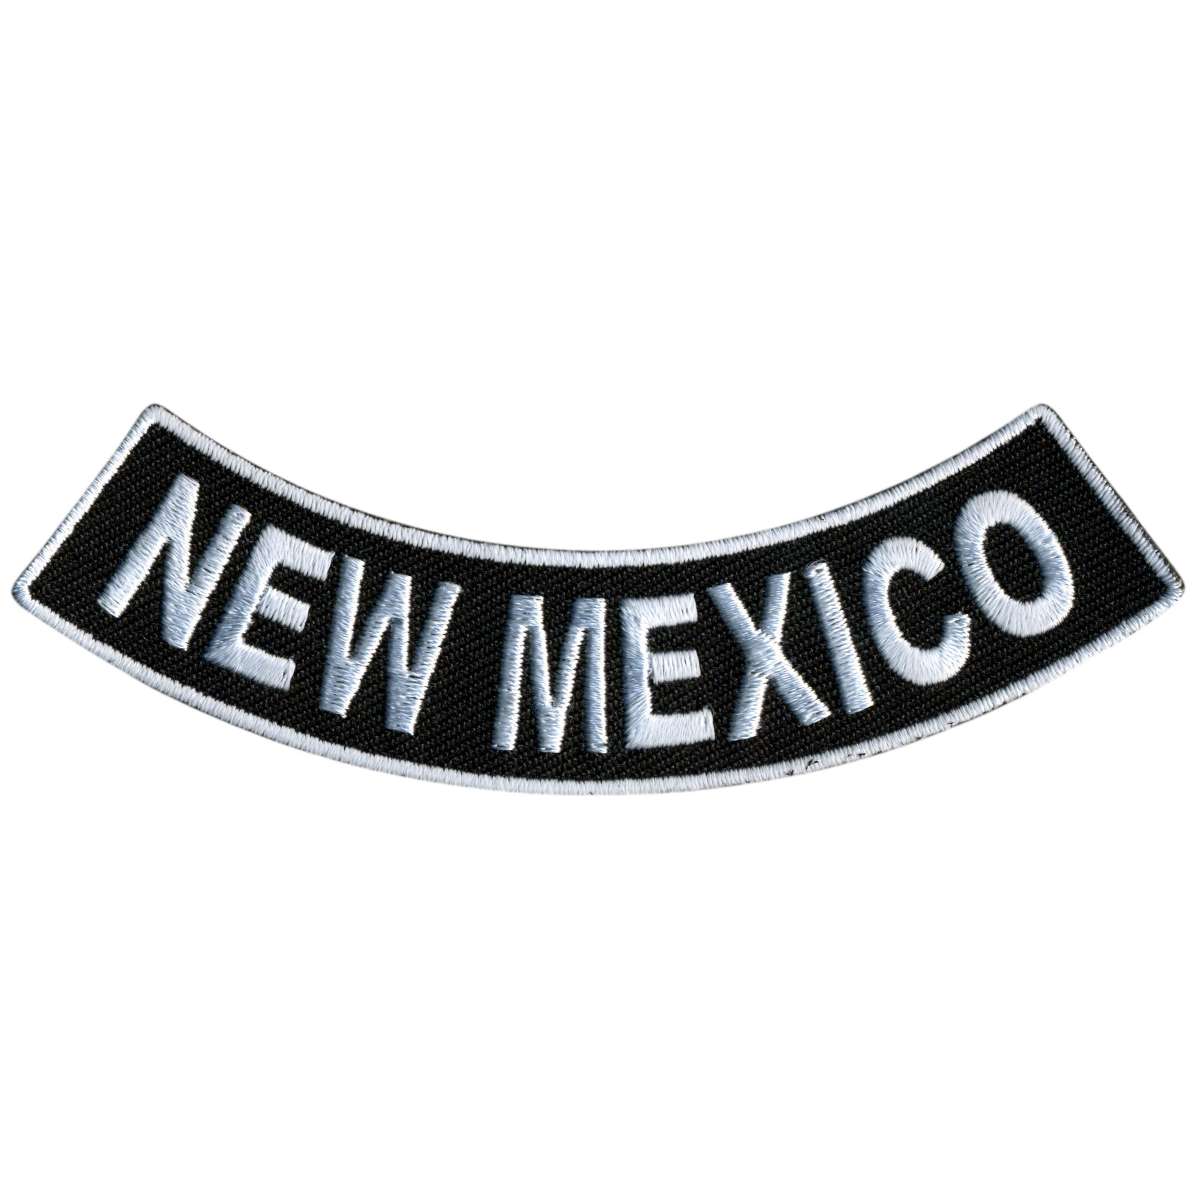 Hot Leathers New Mexico 4” X 1” Bottom Rocker Patch PPM5062